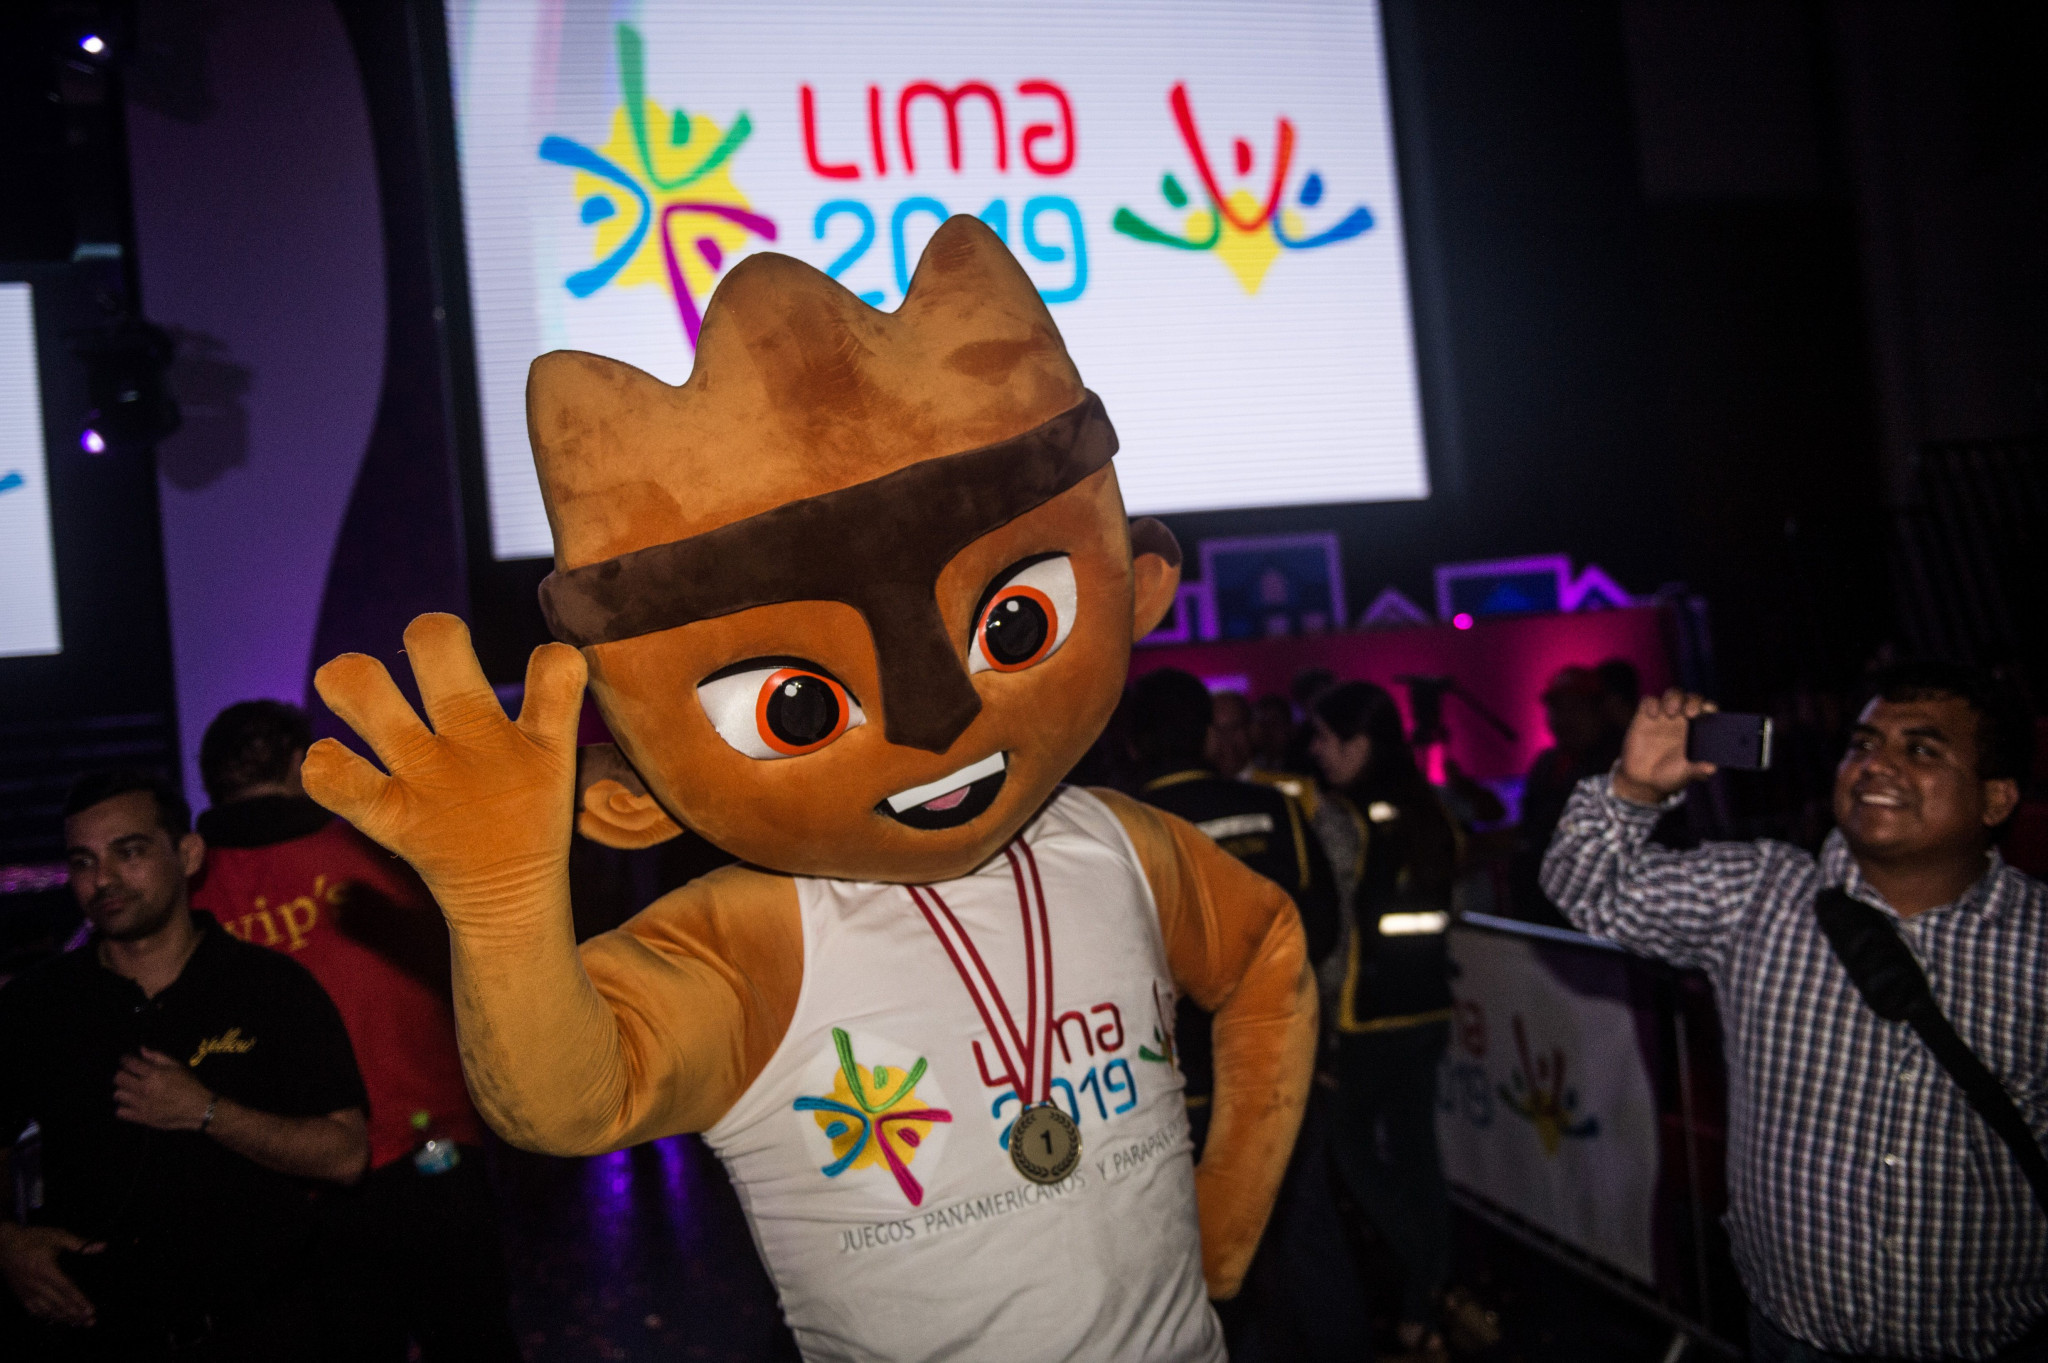 Lima 2019 mascot Milco attended the launch of the Soy Lima 2019 campaign ©Getty Images